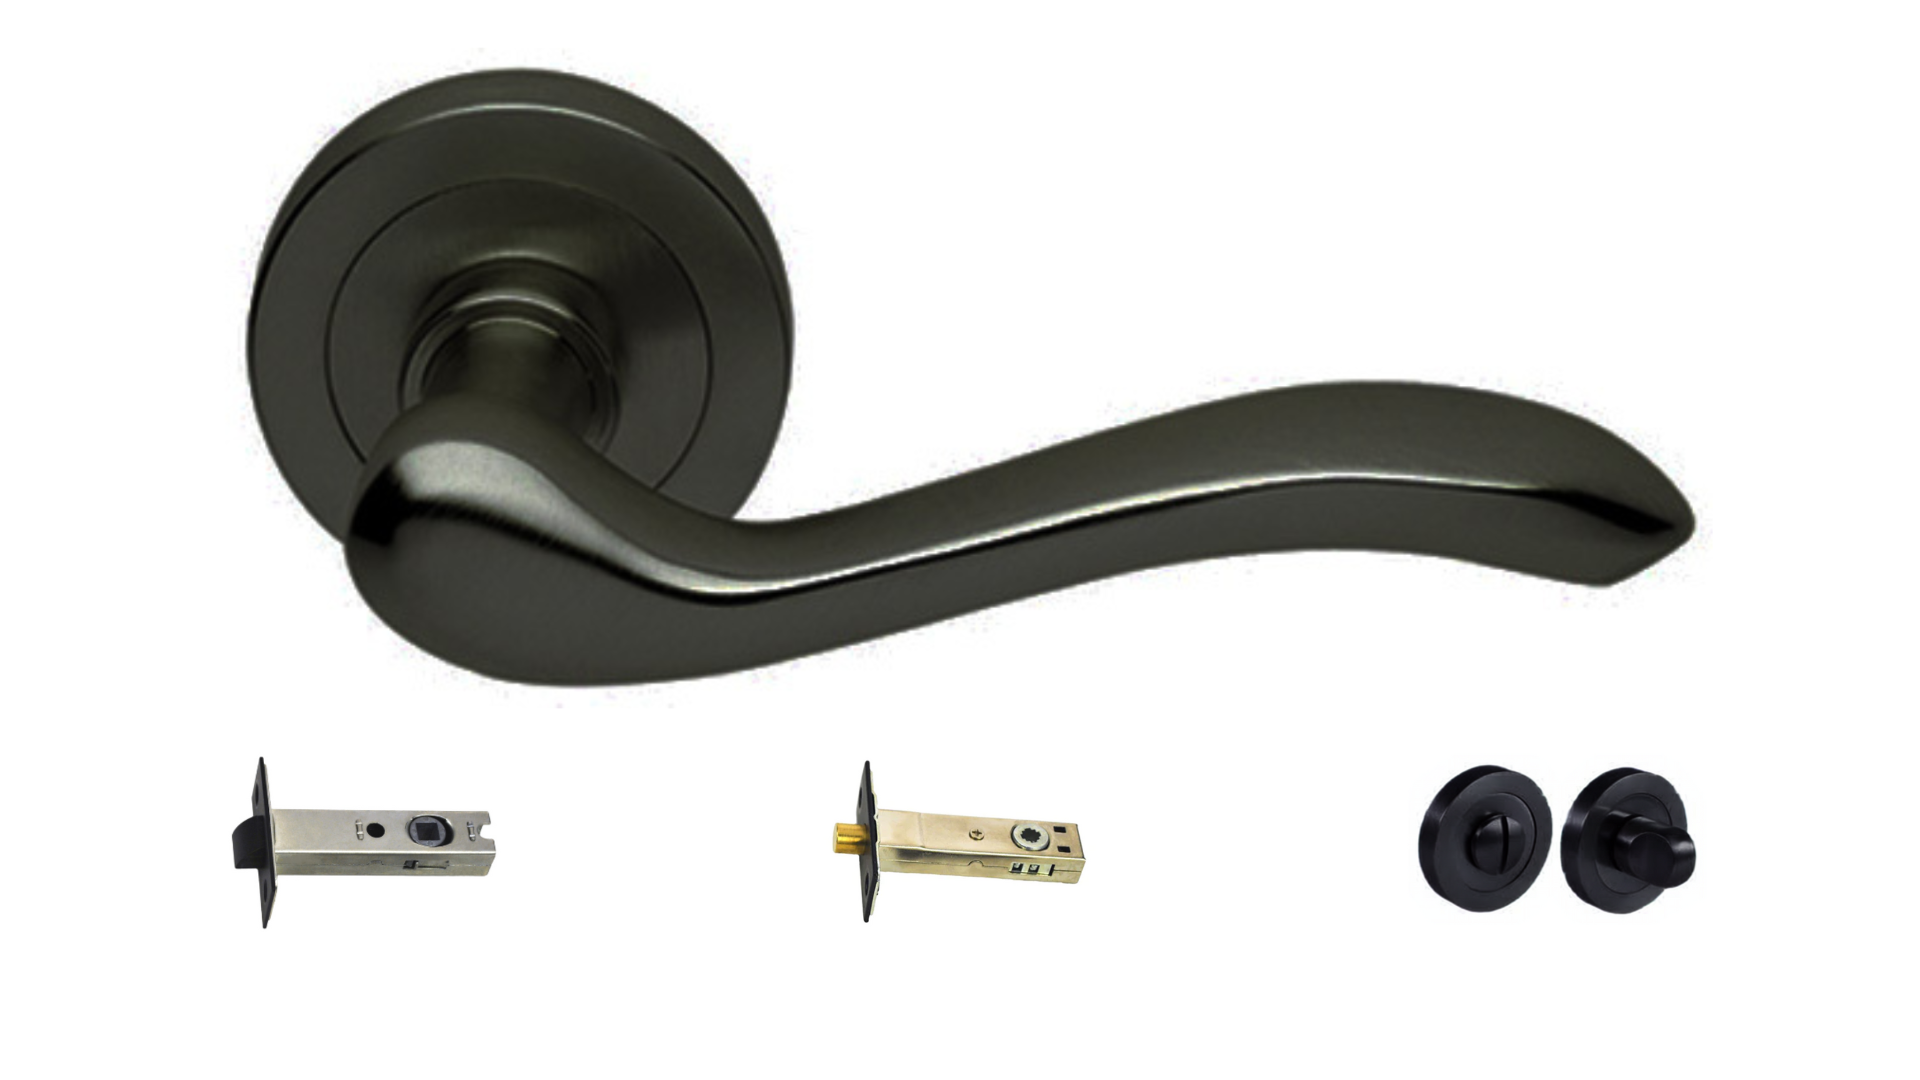 The Erica door handle in Matt Black with a tubular latch, privacy bolt and privacy turn kit underneath on a white background.